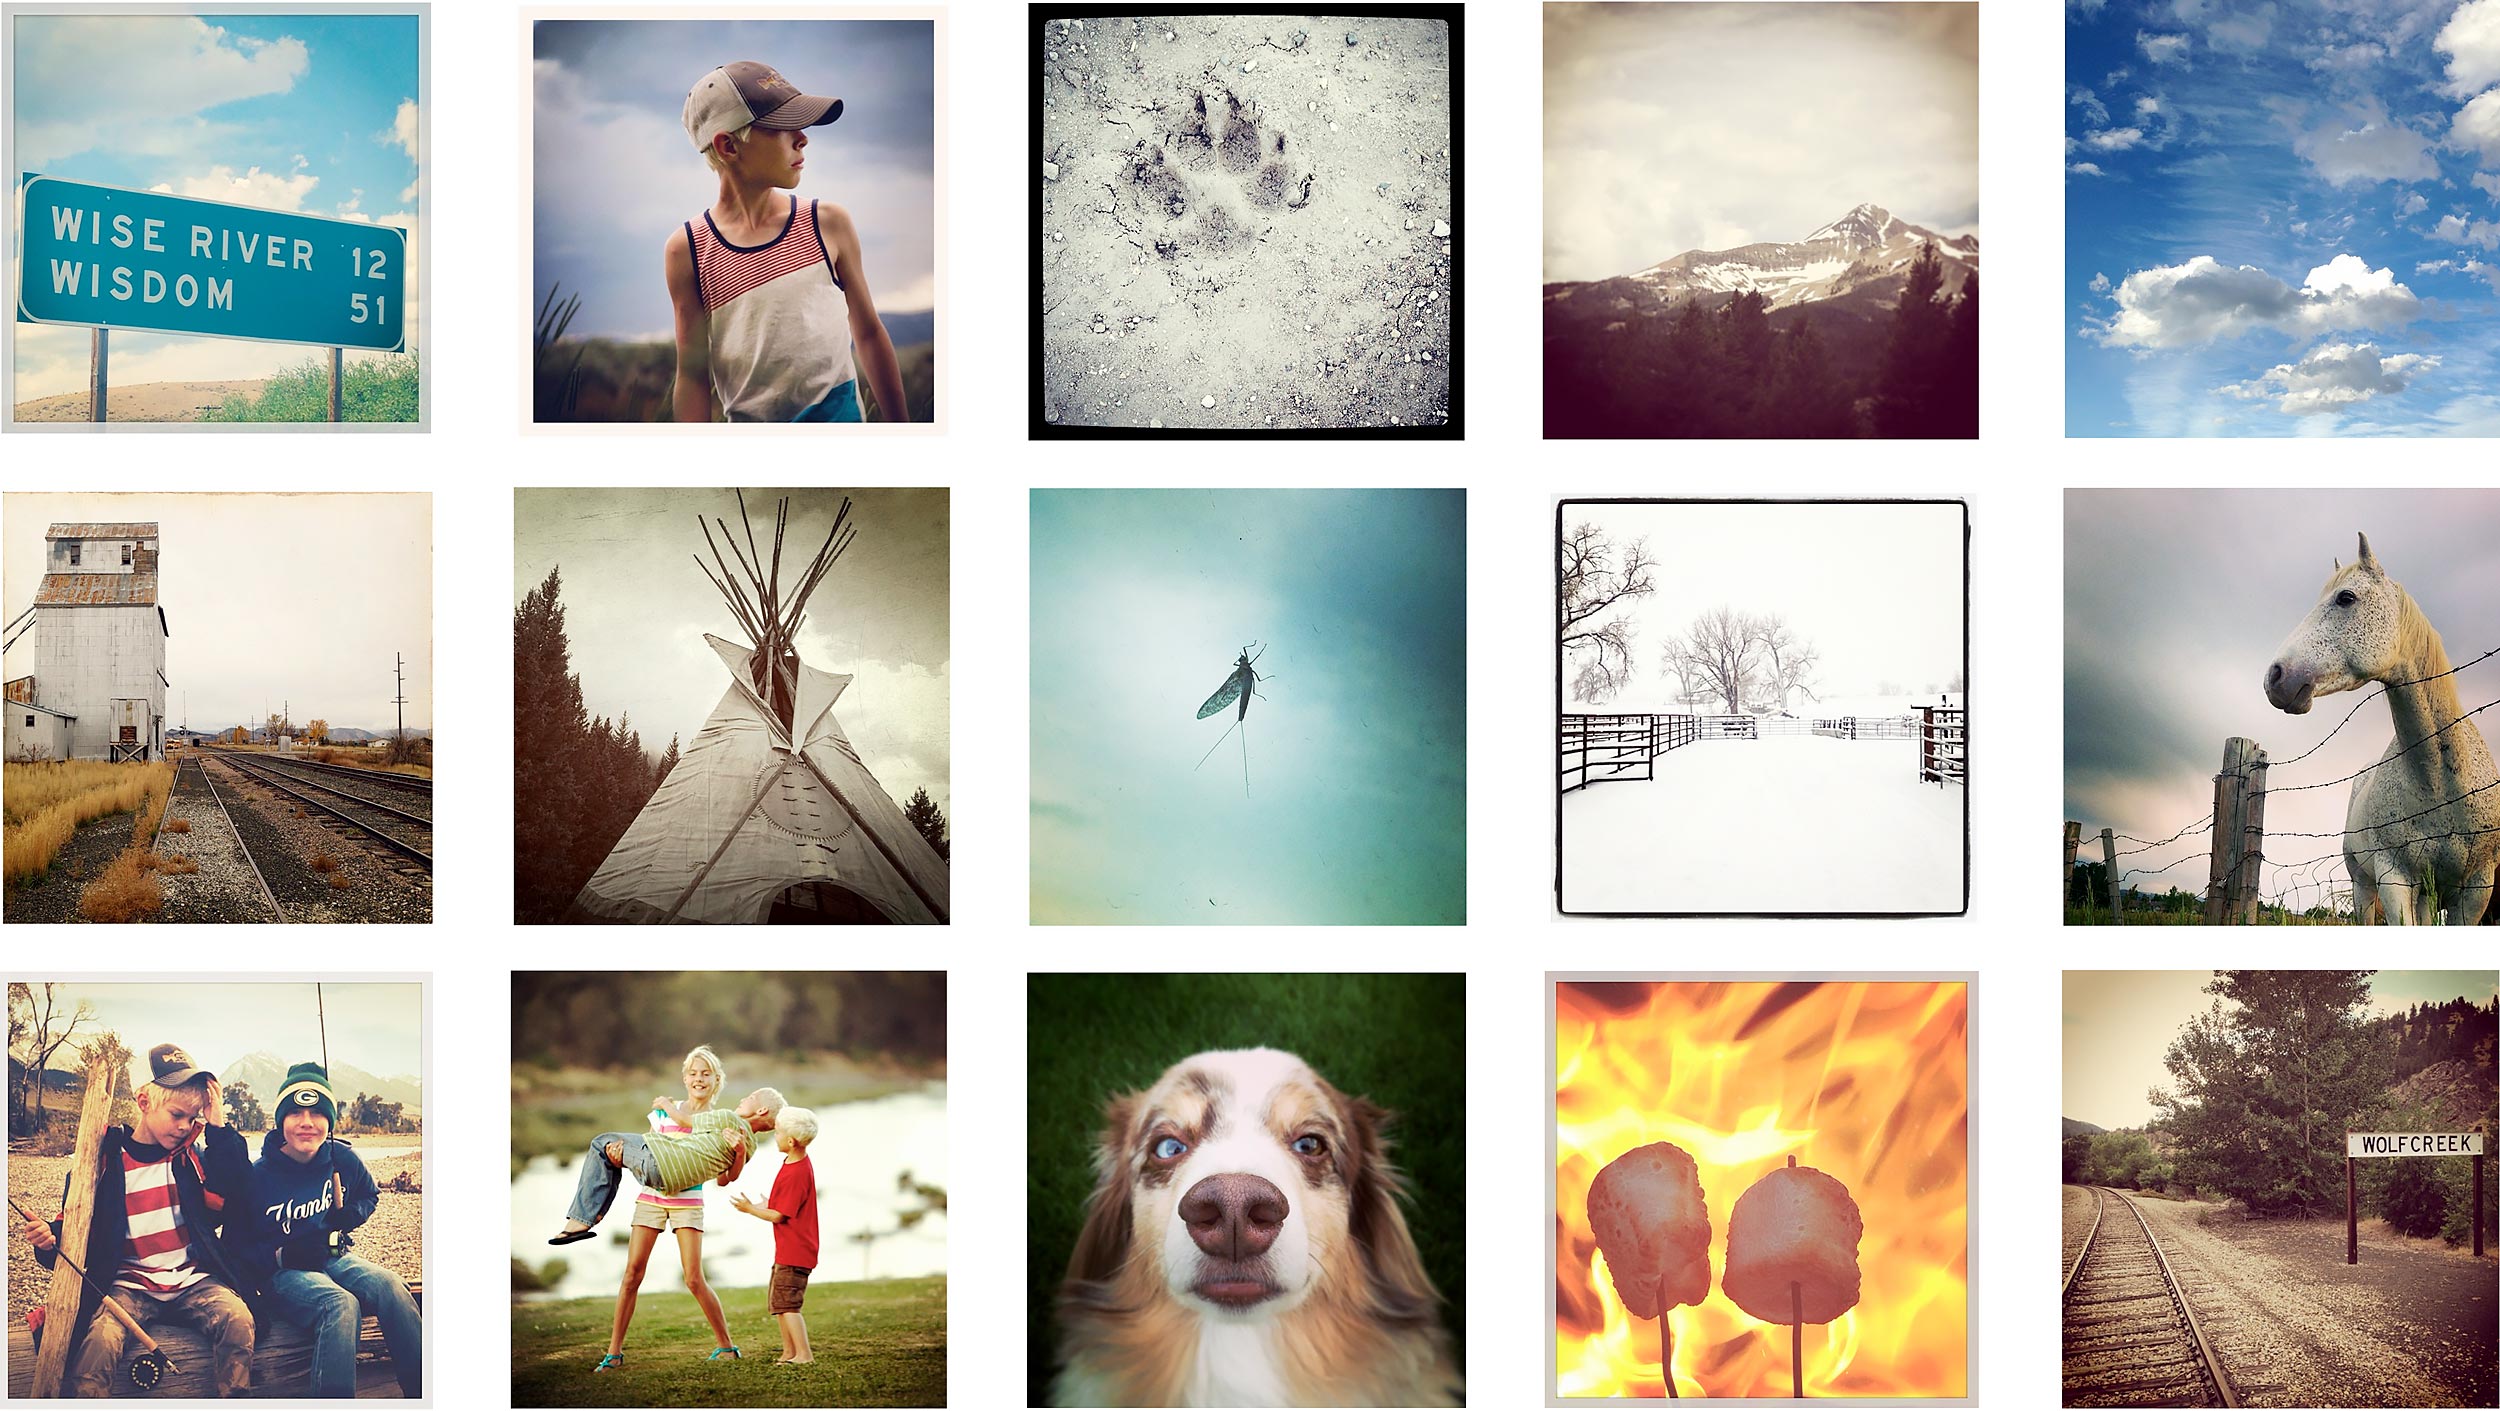 Instagram samples from @wiseriverproductions